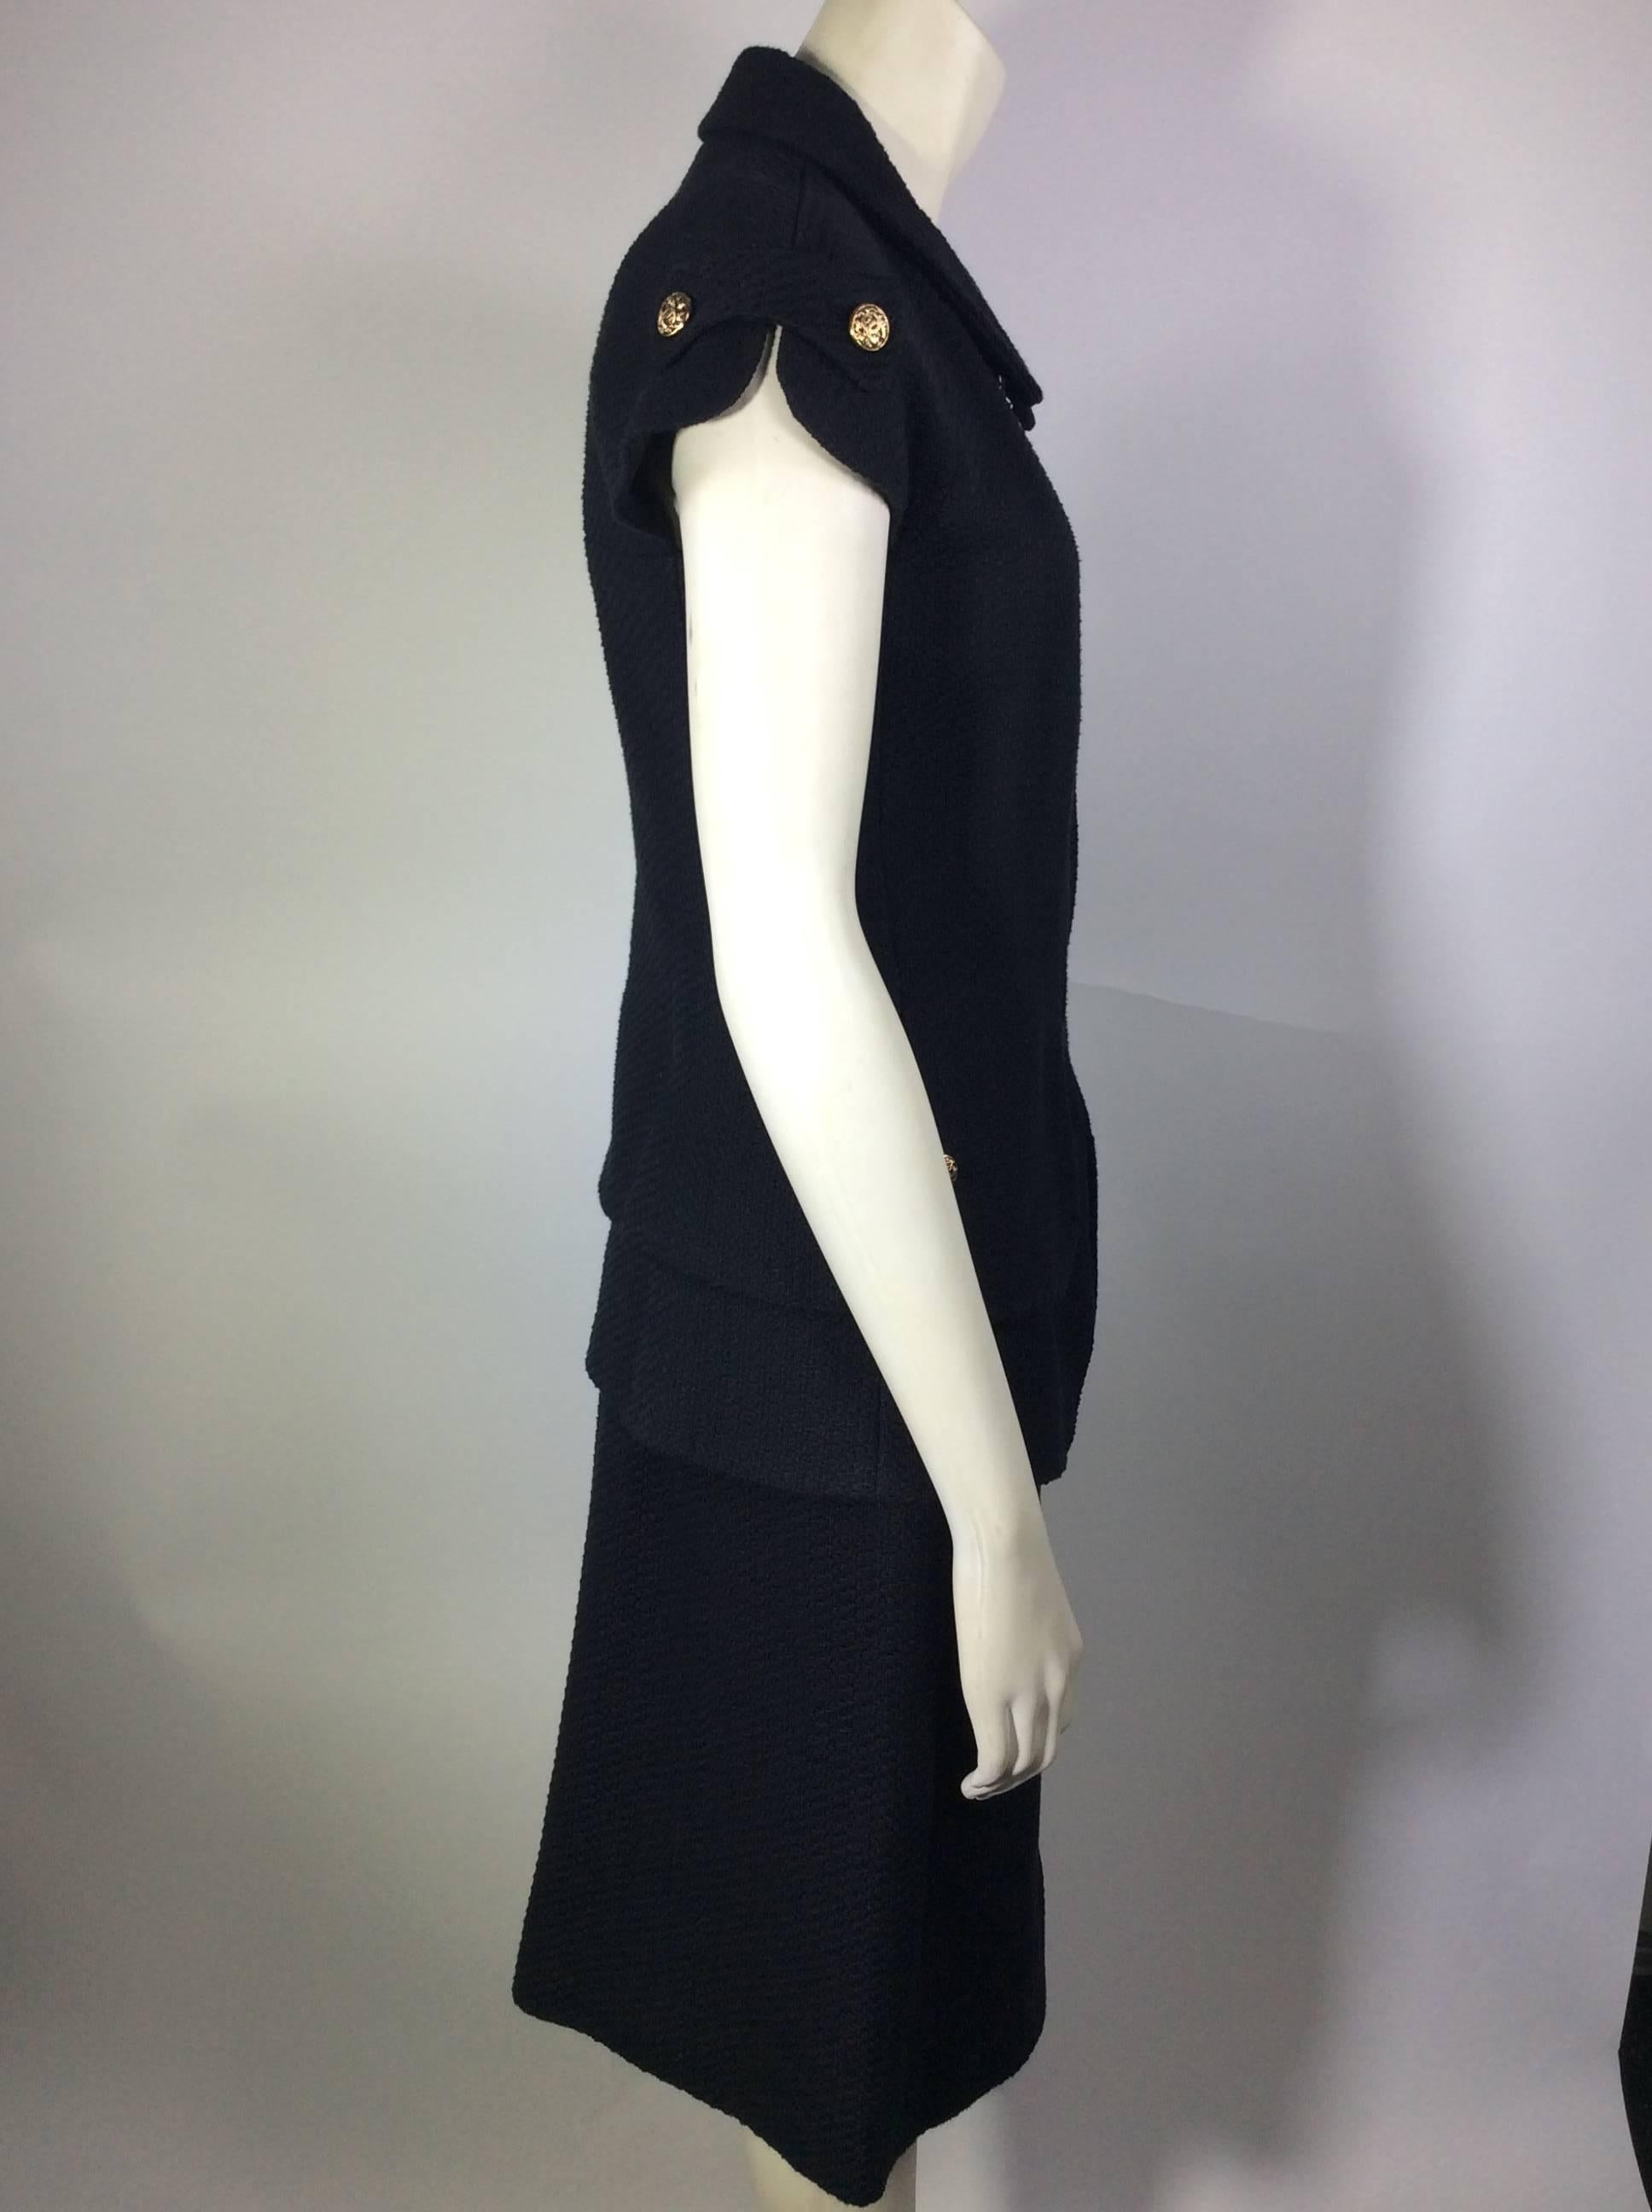 Chanel 2007 Black Cotton Suit with Gold Buttons In Excellent Condition For Sale In Narberth, PA